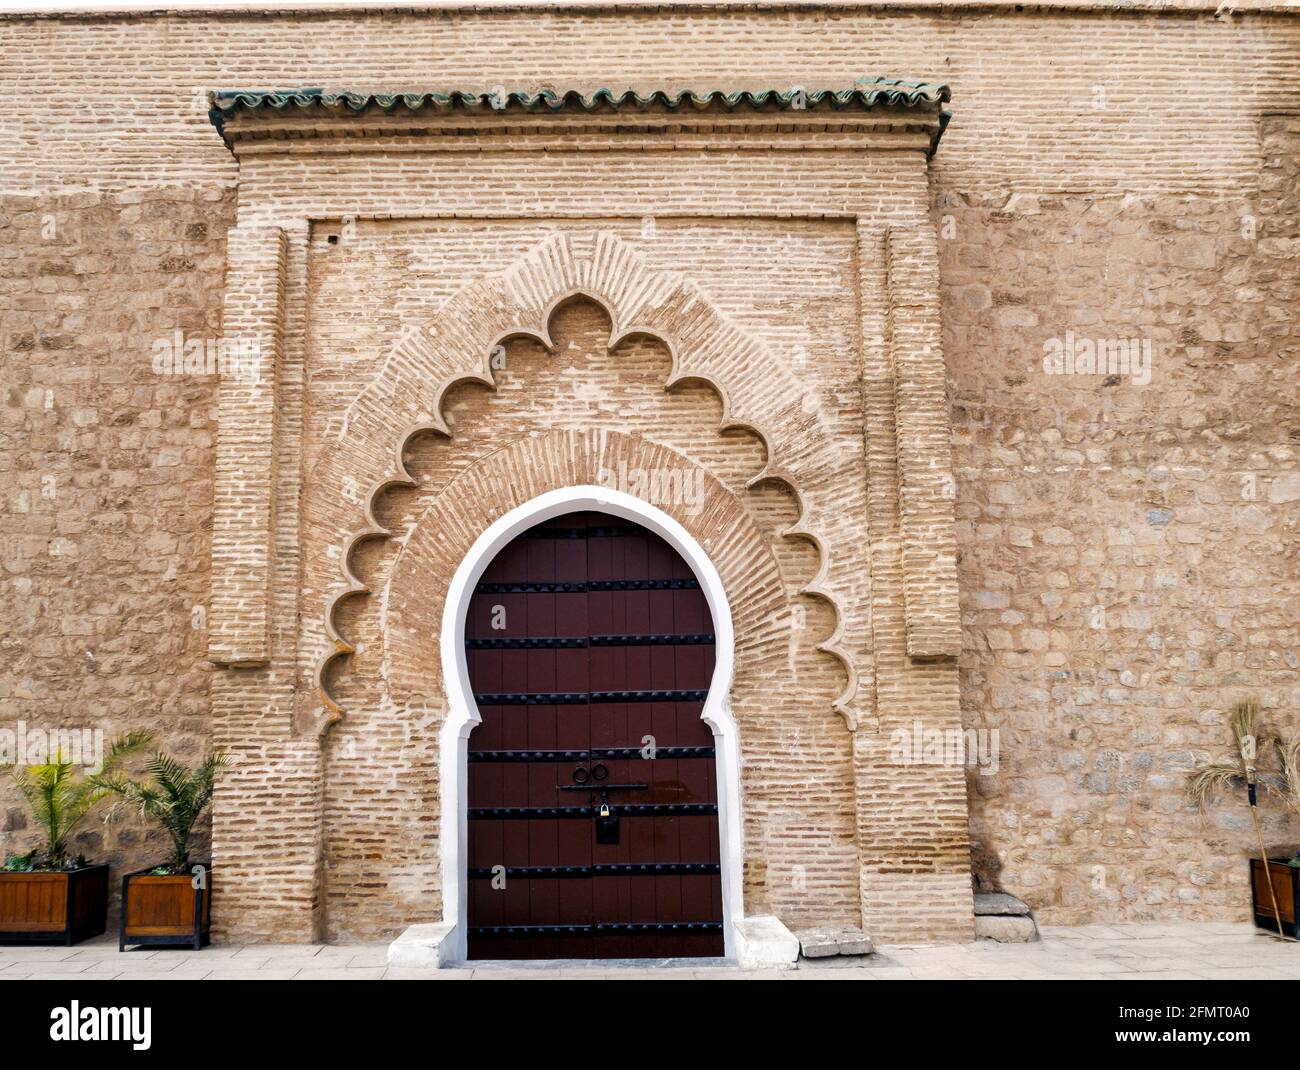 White surround to a massive wooden door on this entrance to the Koutoubia Mosque Marrakesh Stock Photo